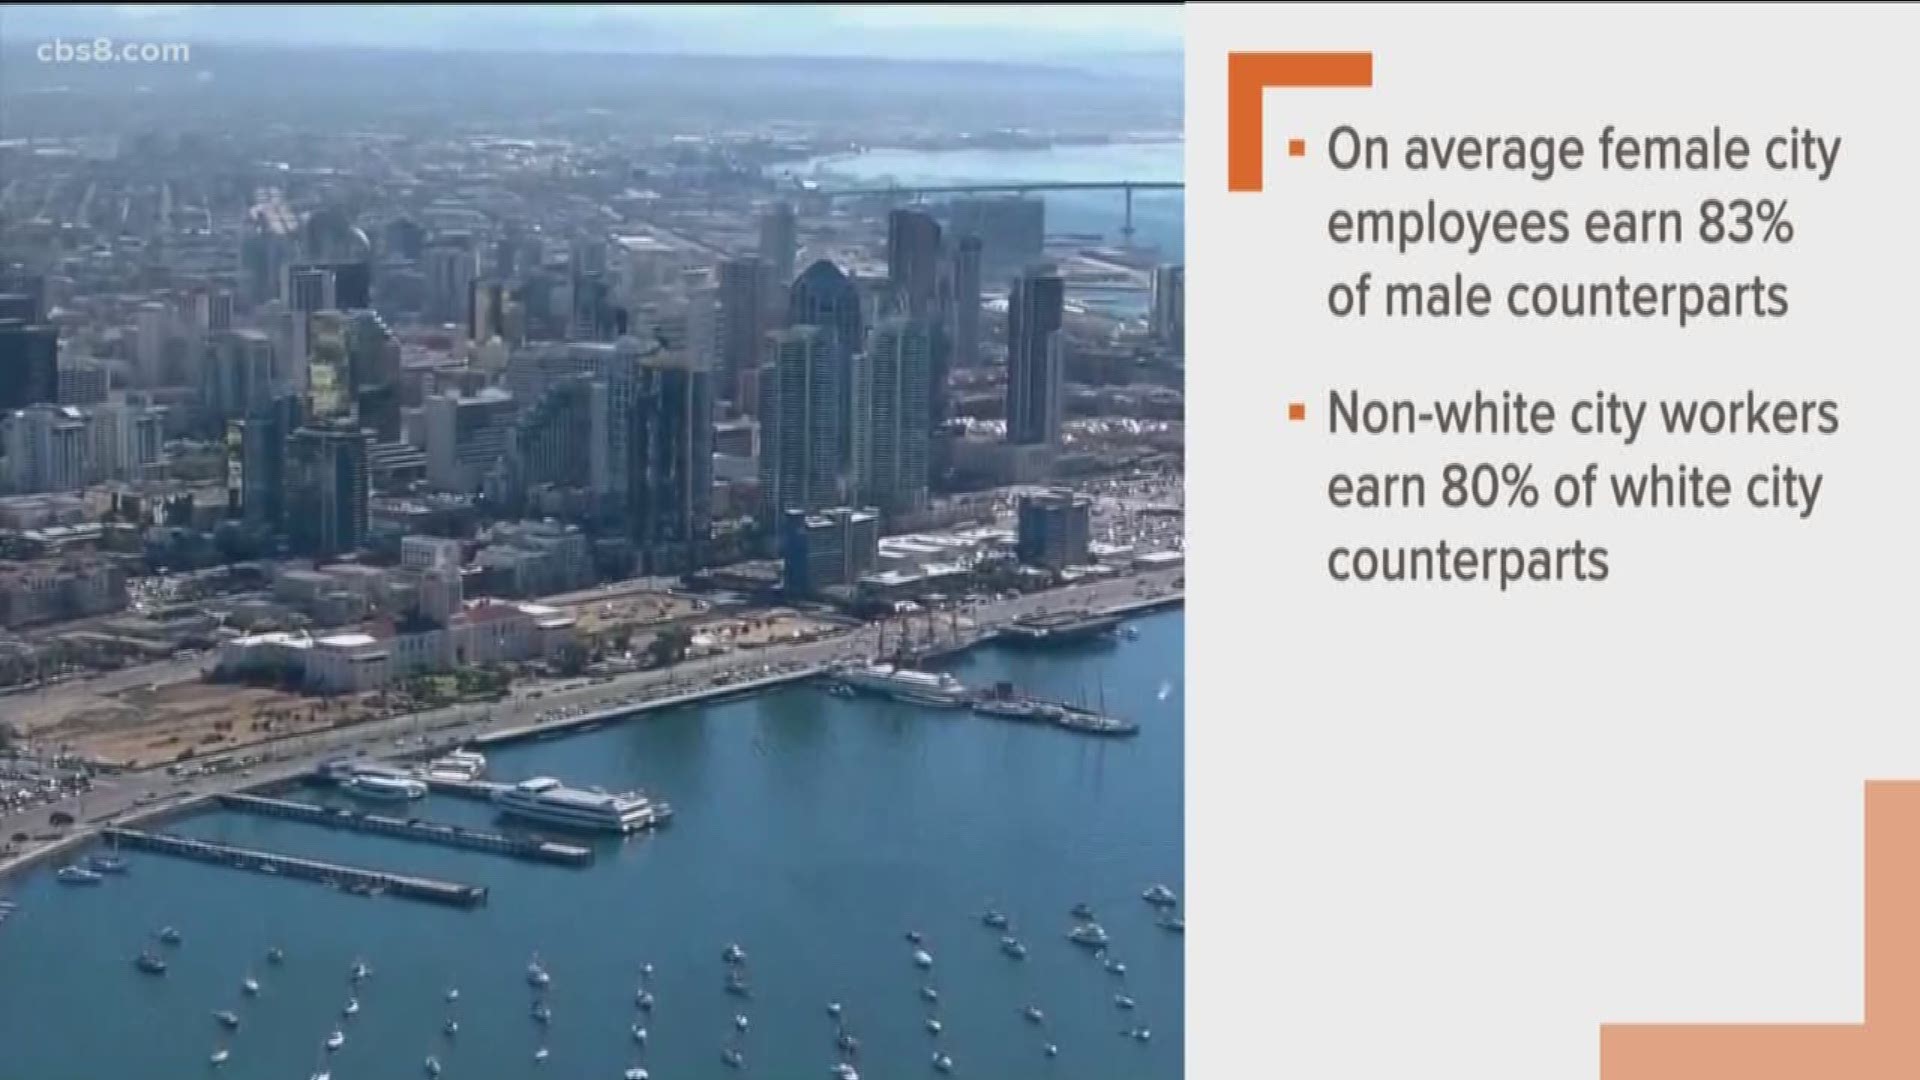 San Diego will be largest U.S. city to conduct wage equity study to expand diversity in leadership and address compensation gaps for women and minorities.